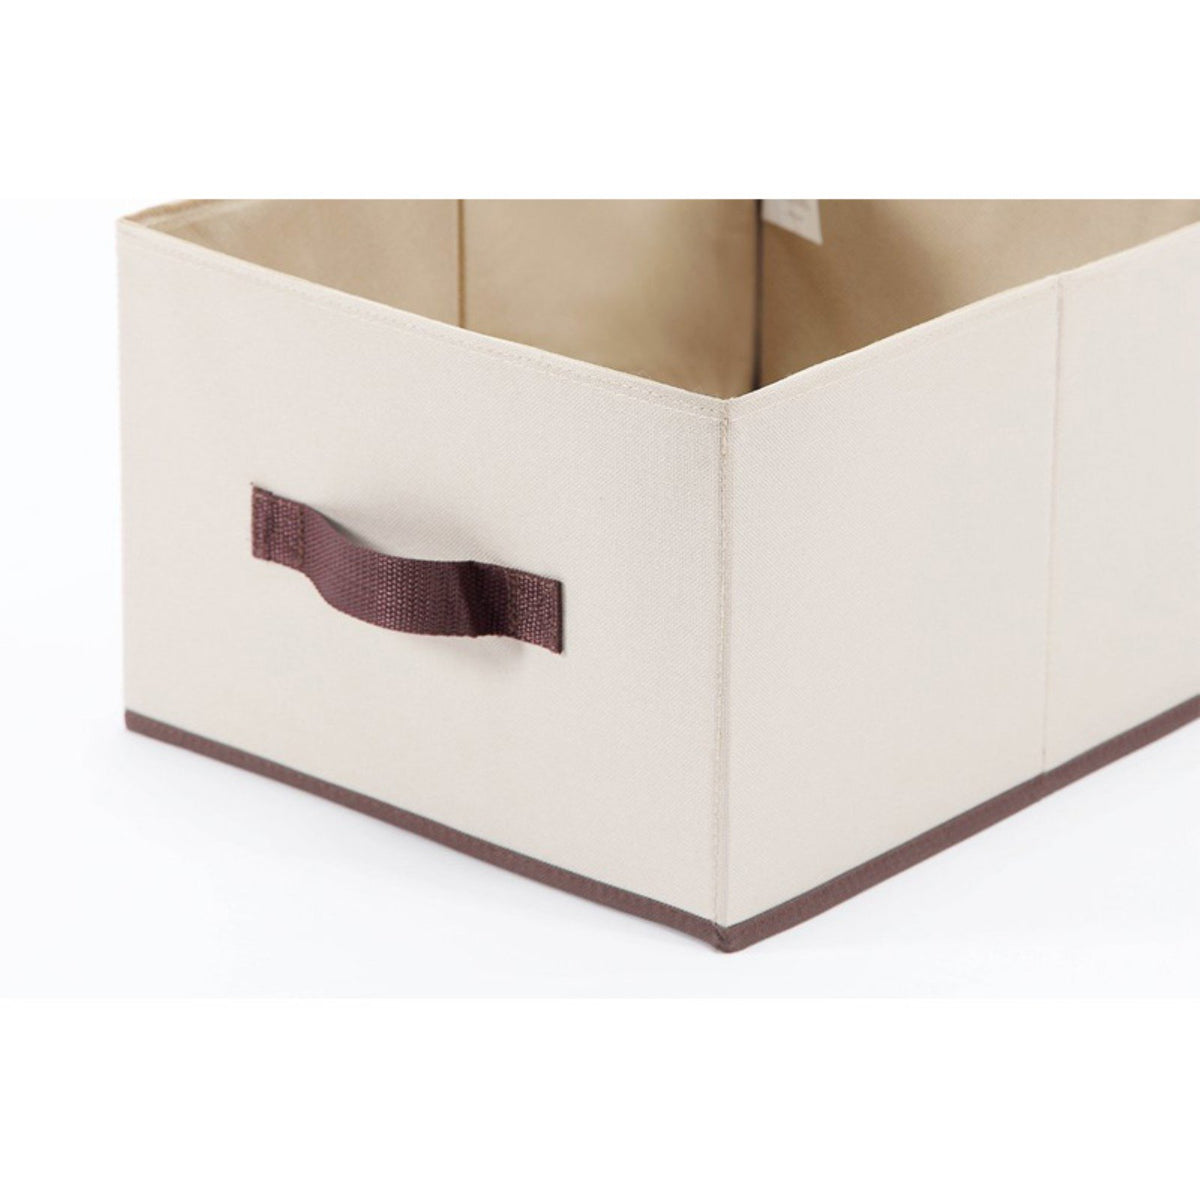 Lidded Canvas Storage Boxes with Handle For Closet Wardrobe Drawer Organization